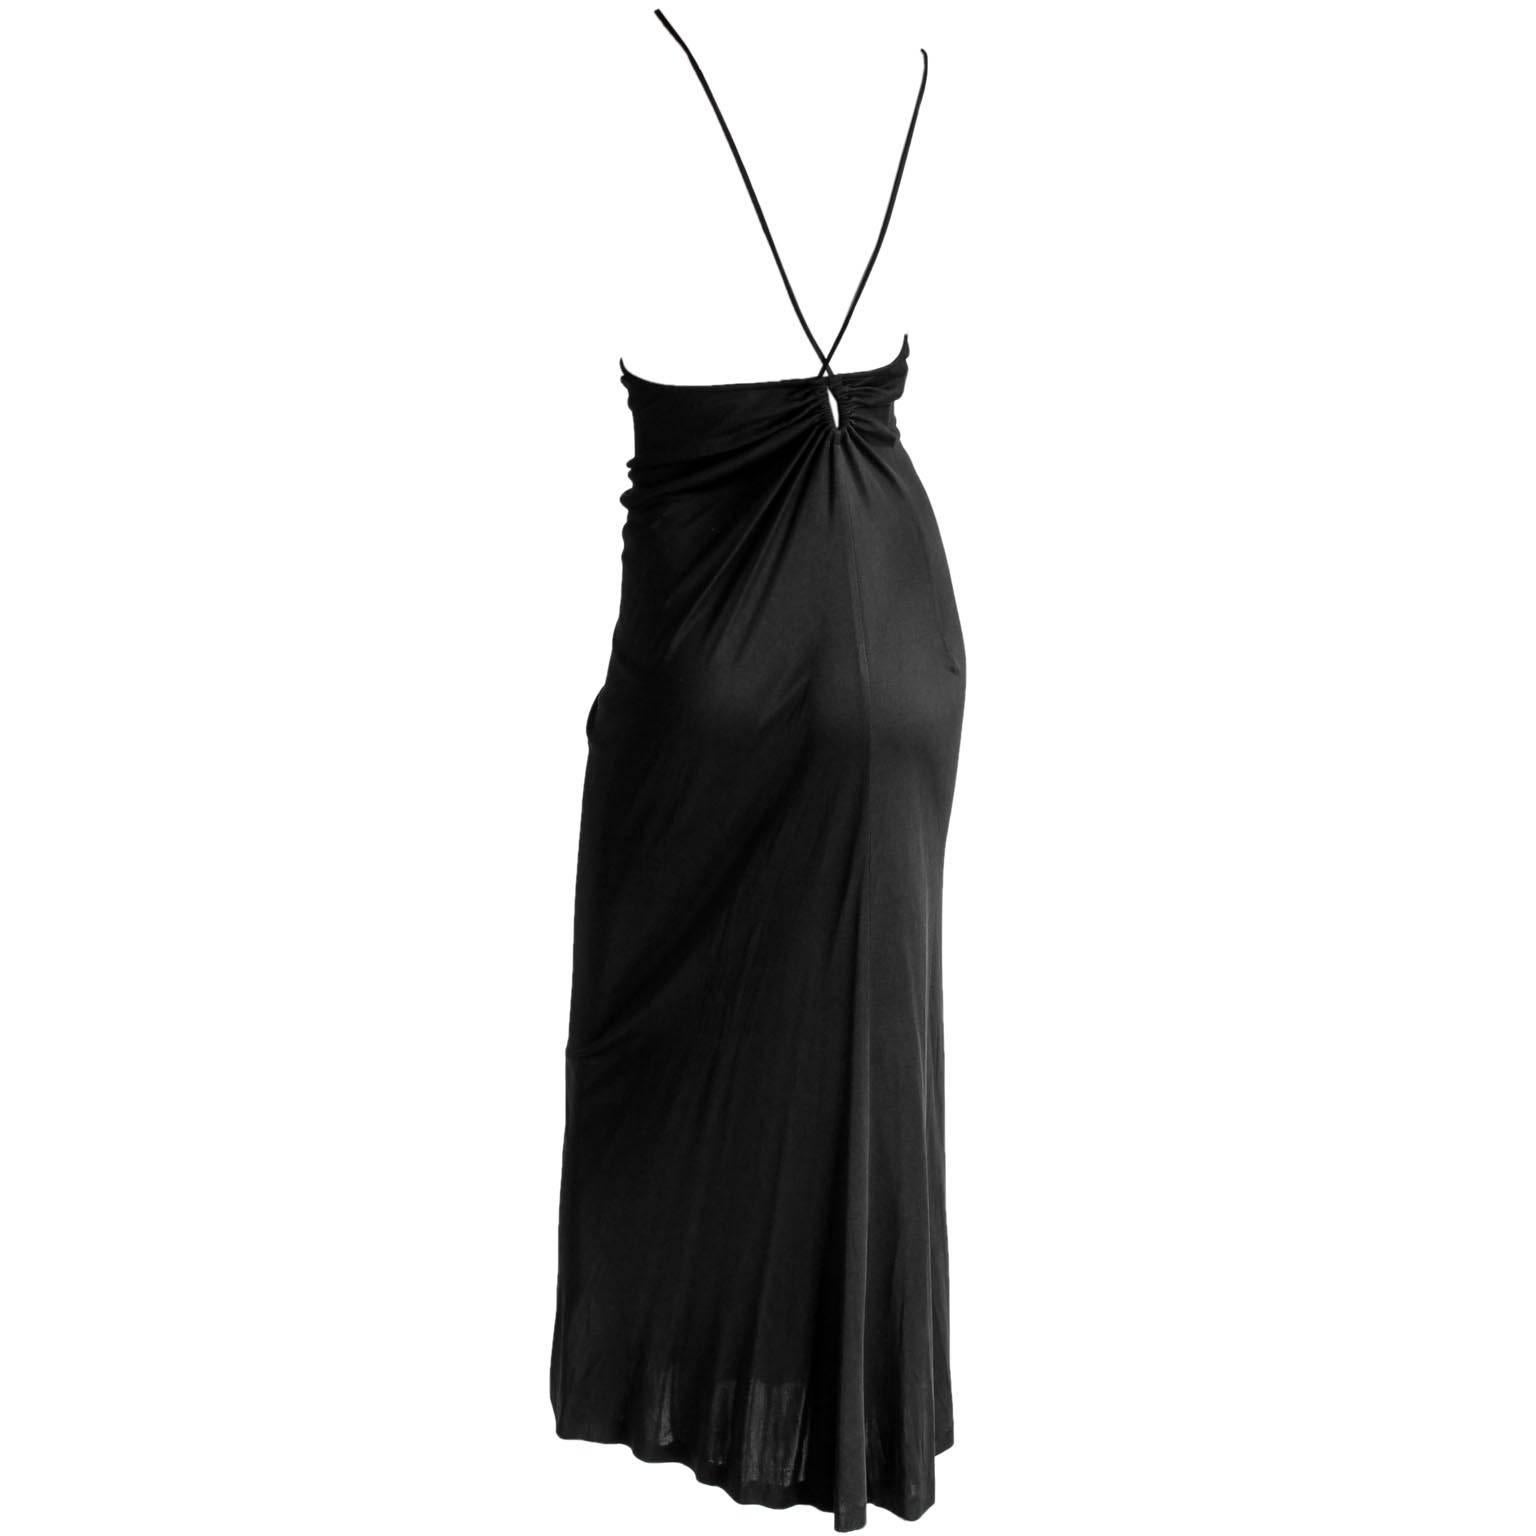 Uber Rare And Iconic Tom Ford For Gucci Spring Summer 1997 Black Backless Maxi Dress!

Who could ever forget Tom Ford's spring summer 1997 collection for Gucci? Well this heavenly maxi dress, surely one of the most memorable Ford pieces of all, was